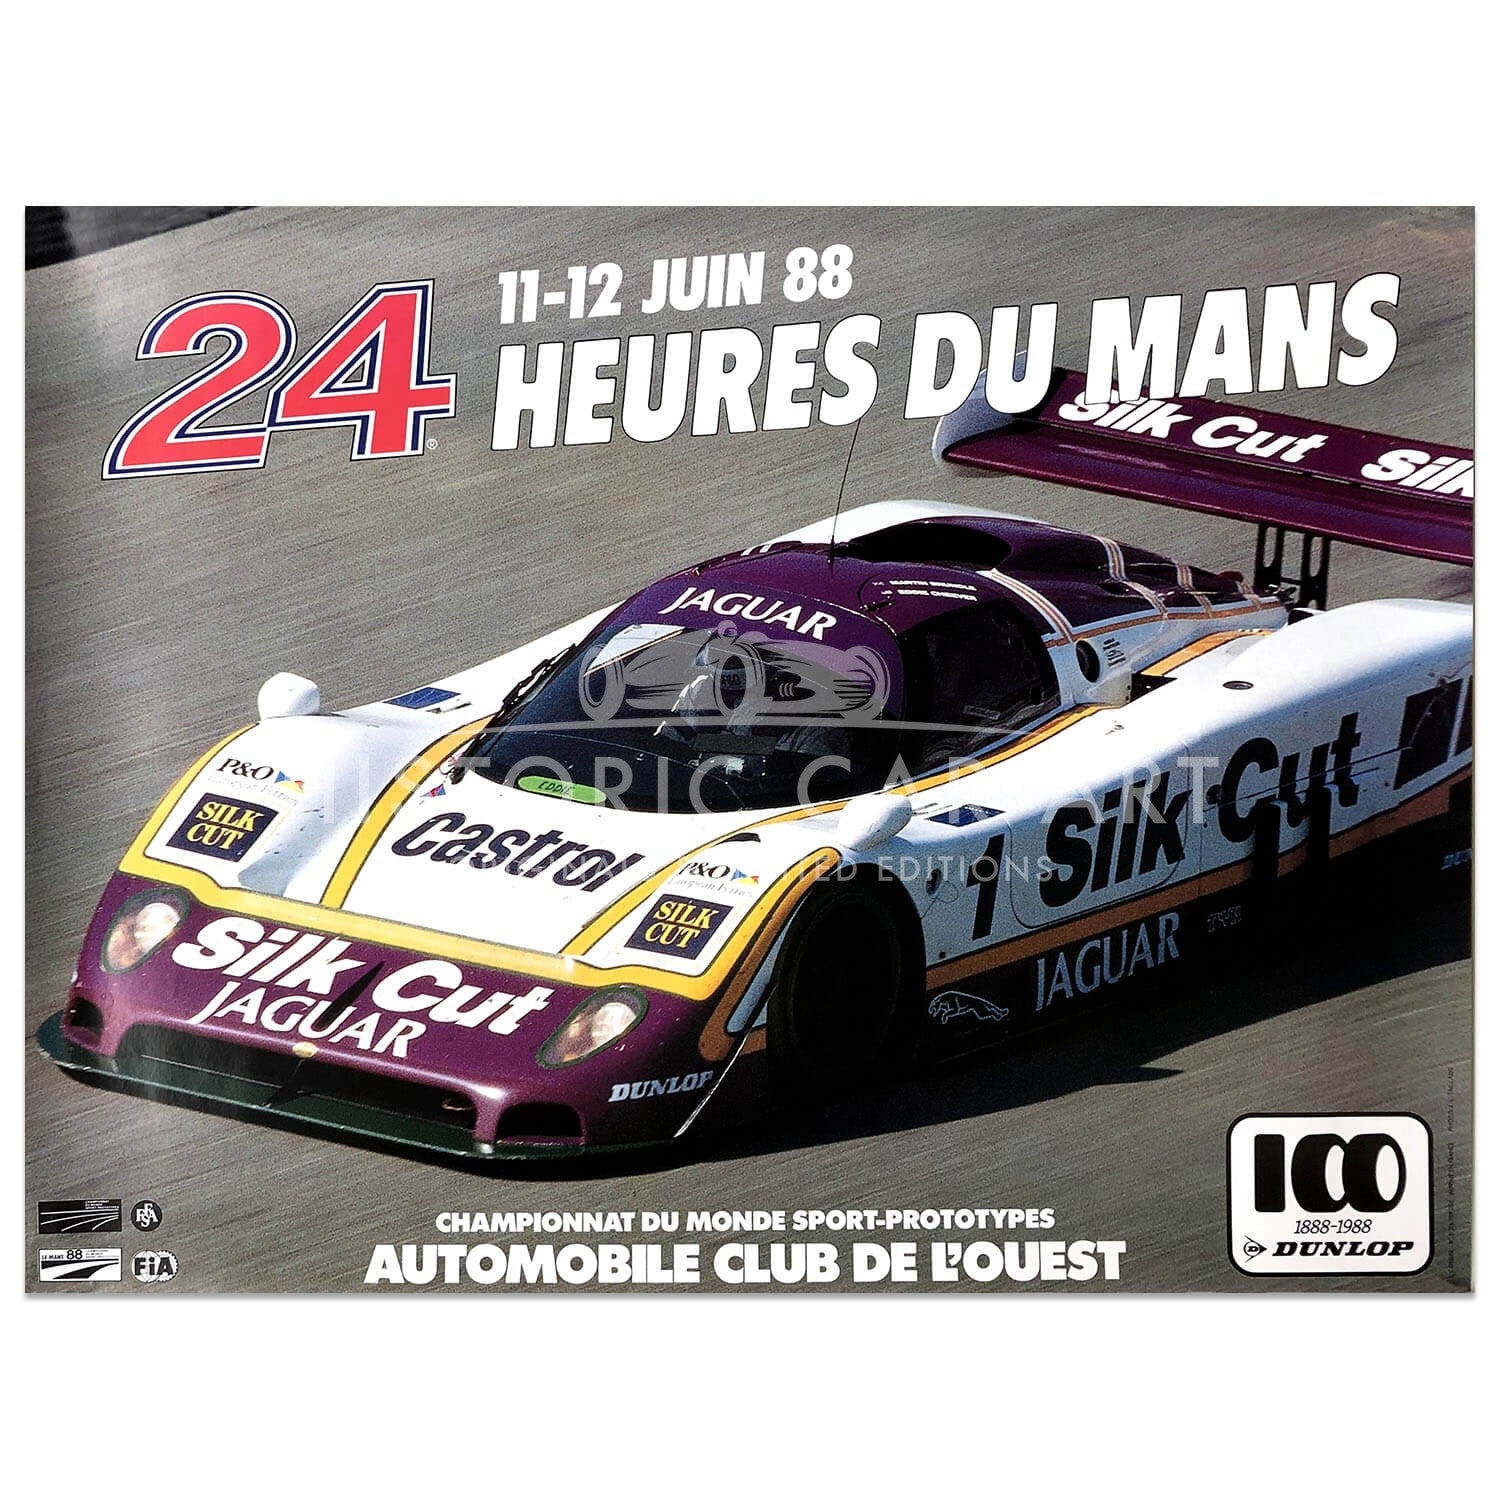 French | Le Mans 24 hours 1988 Original Poster